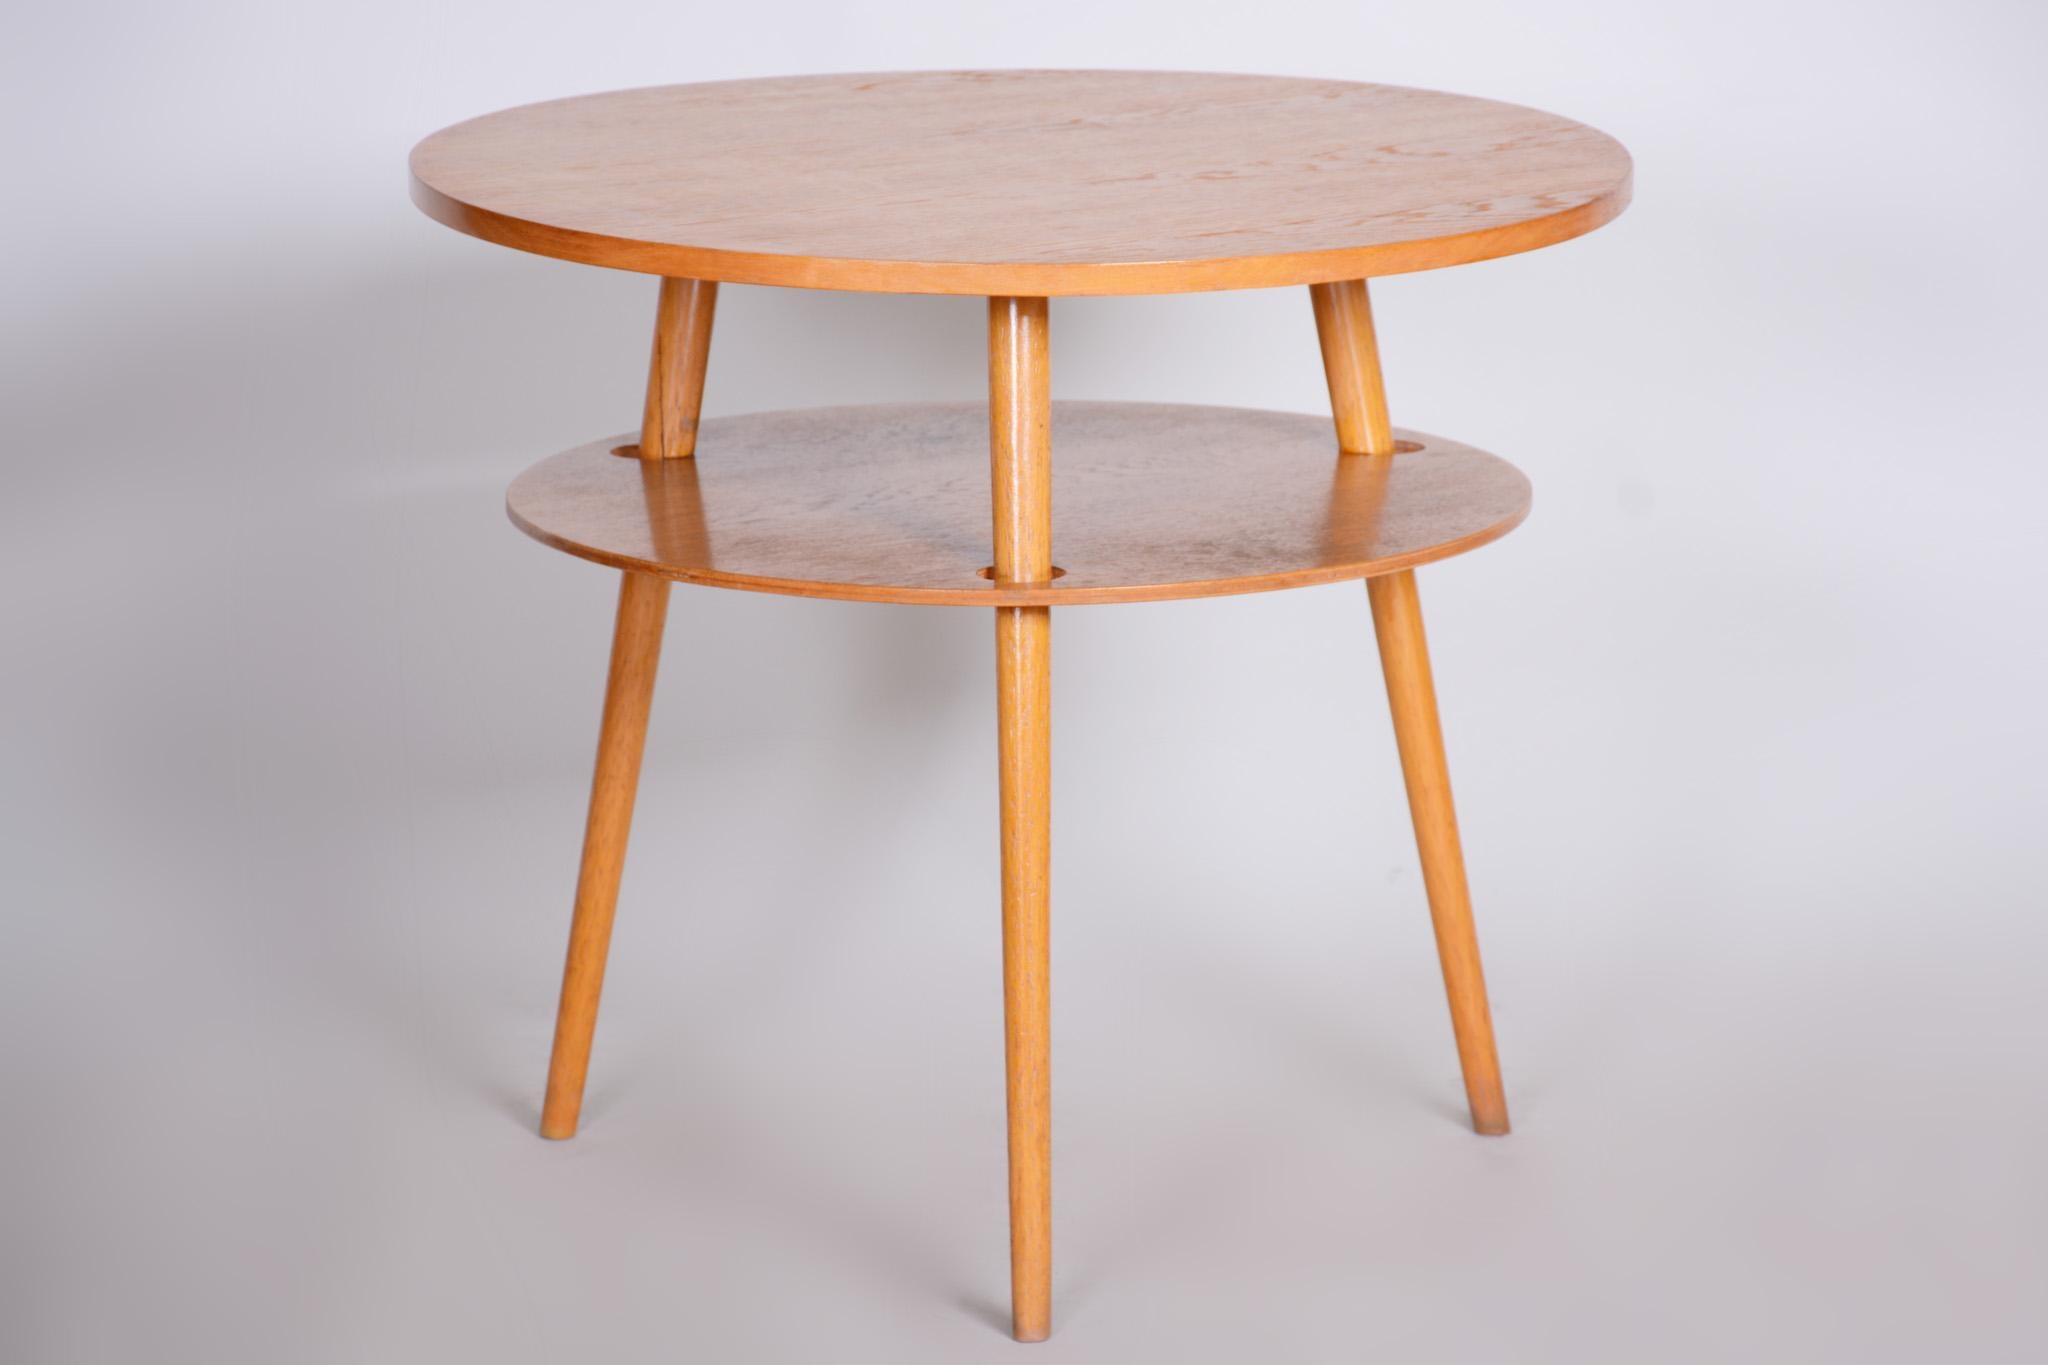 Small table, made in Czechia
Czech Mid-Century Modern 
Material: Oak
Period: 1950-1959.